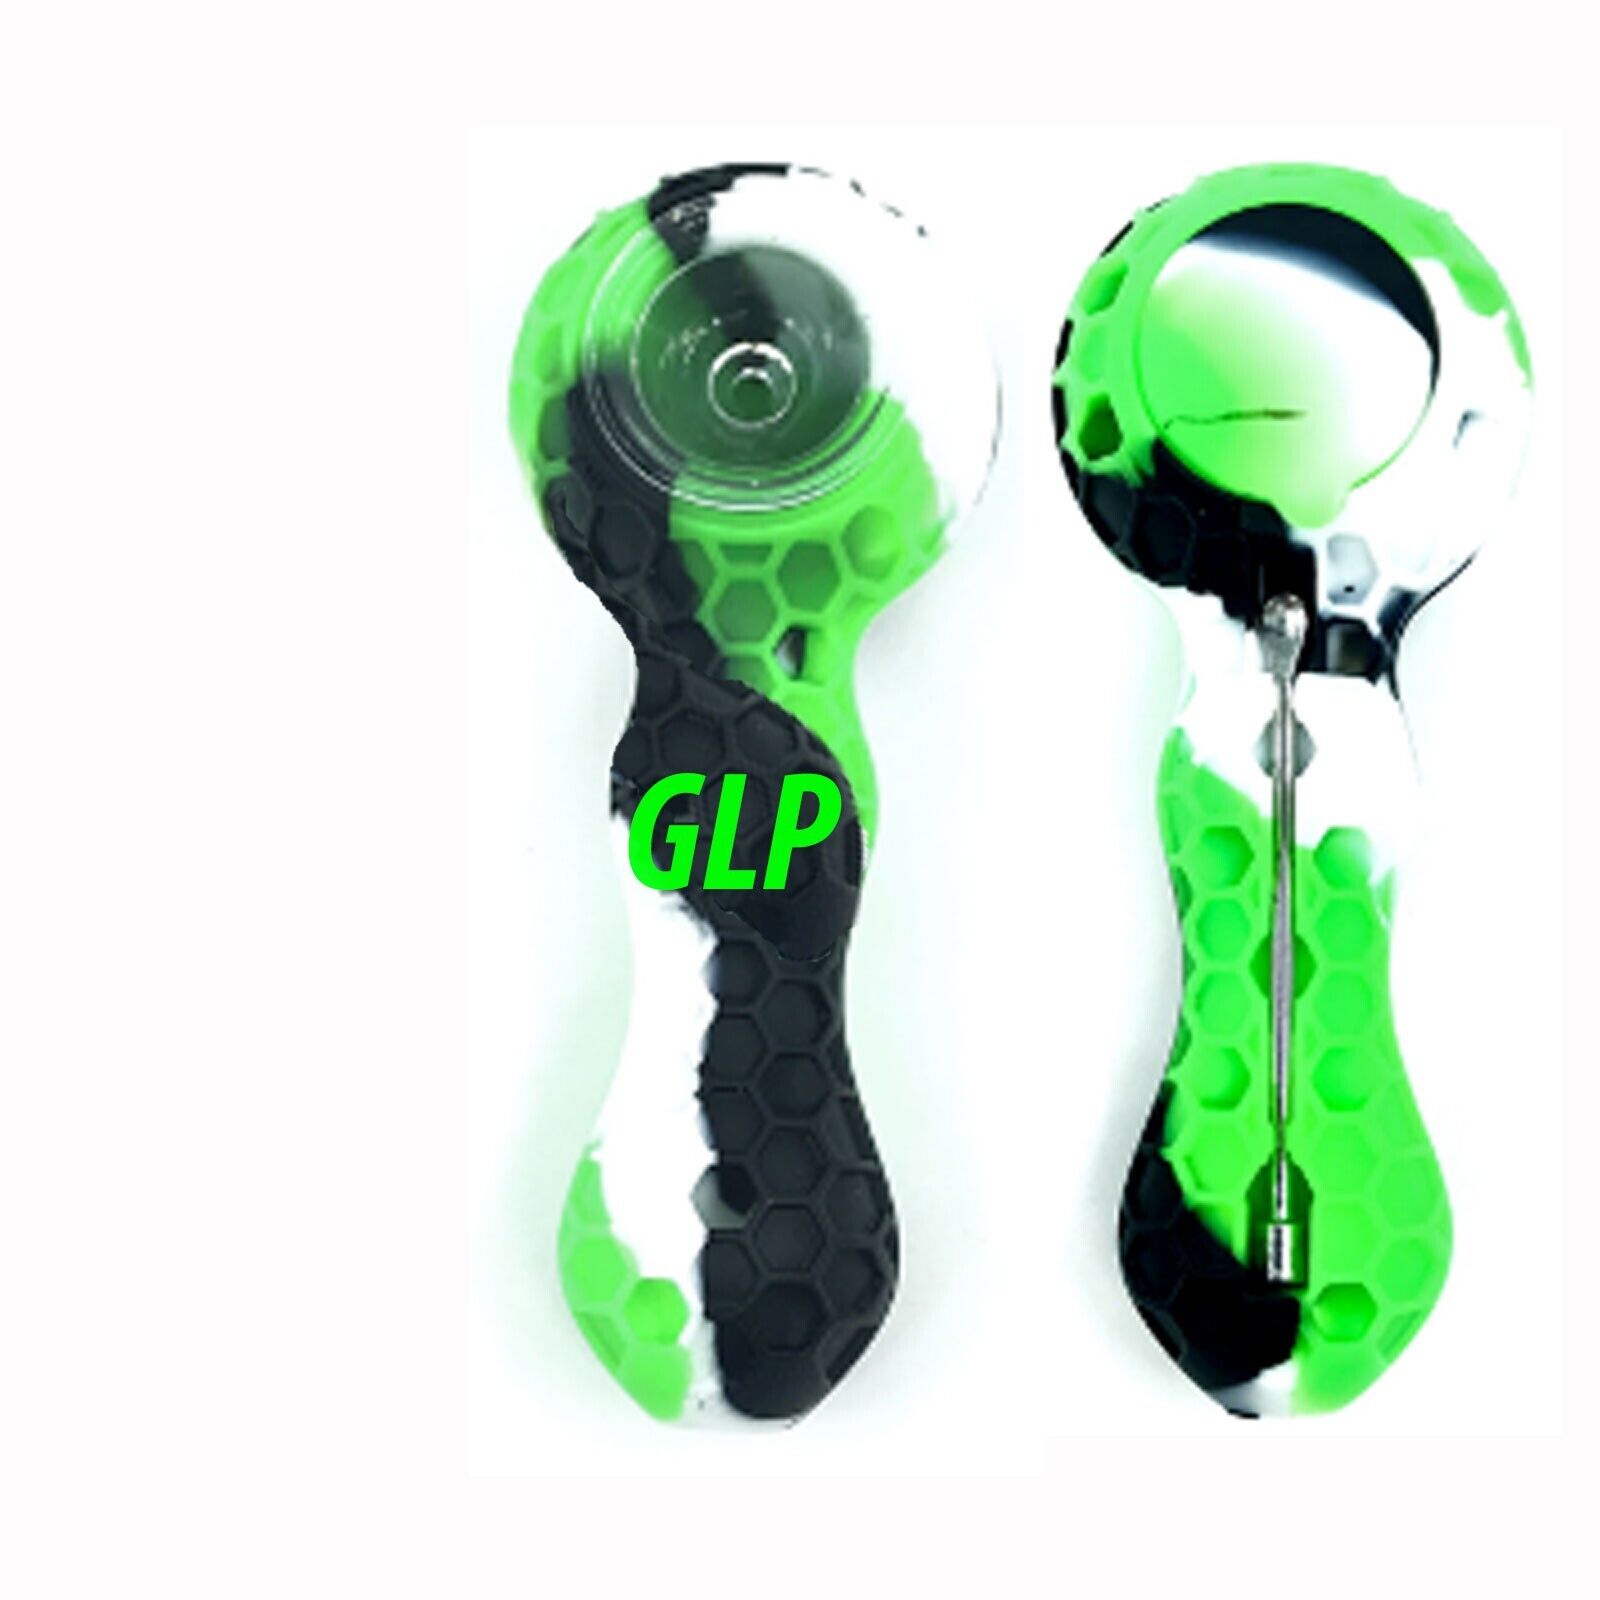 Unbreakable Silicone Tobacco Smoking Pipe w/ Glass Bowl BLACK Green & WHITE